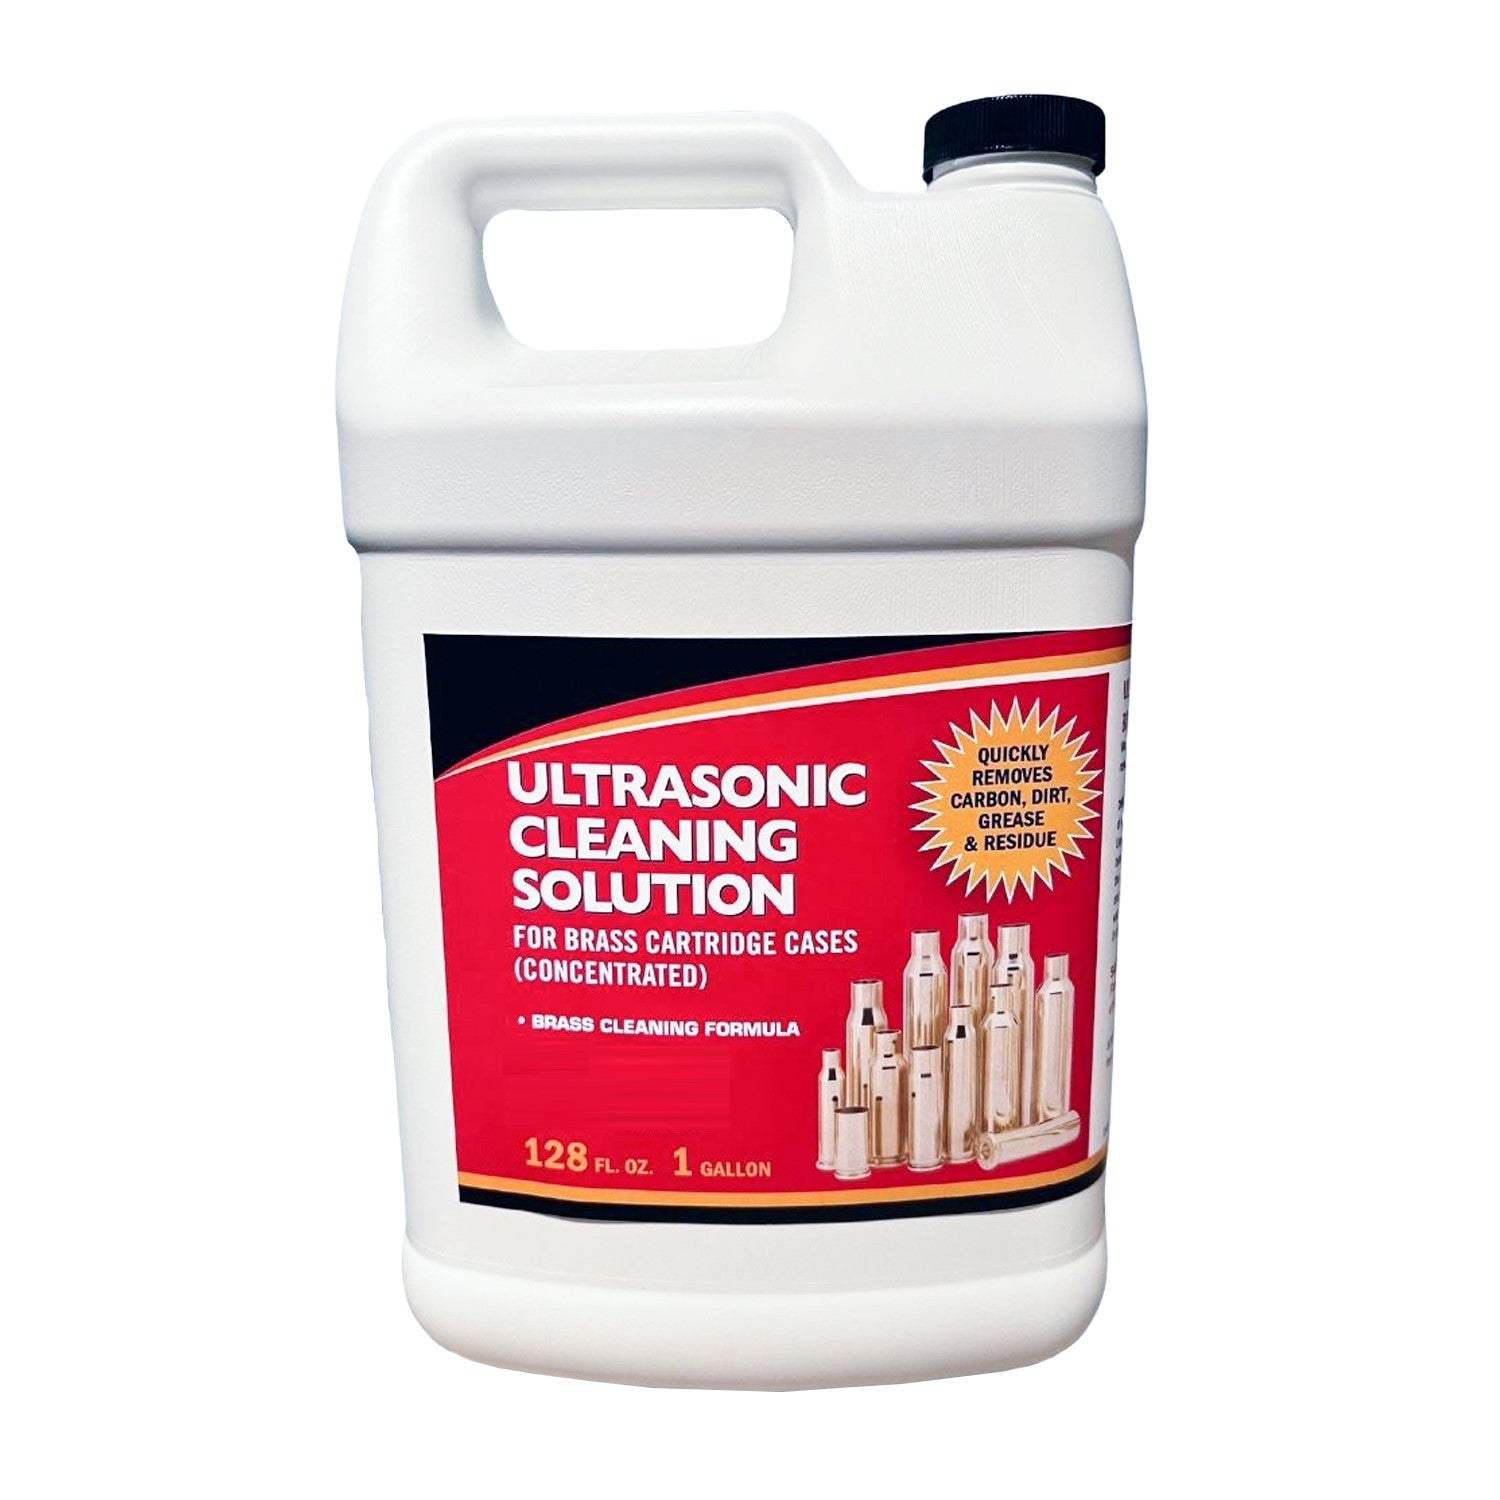 Ultrasonic Cleaner Solution for Gun Brass. Ultrasonic Brass Cleaning Solution Concentrate for Reloading Gun Brass and Brass Ammo Cases. Cleans Inside and Out (1 Gallon)